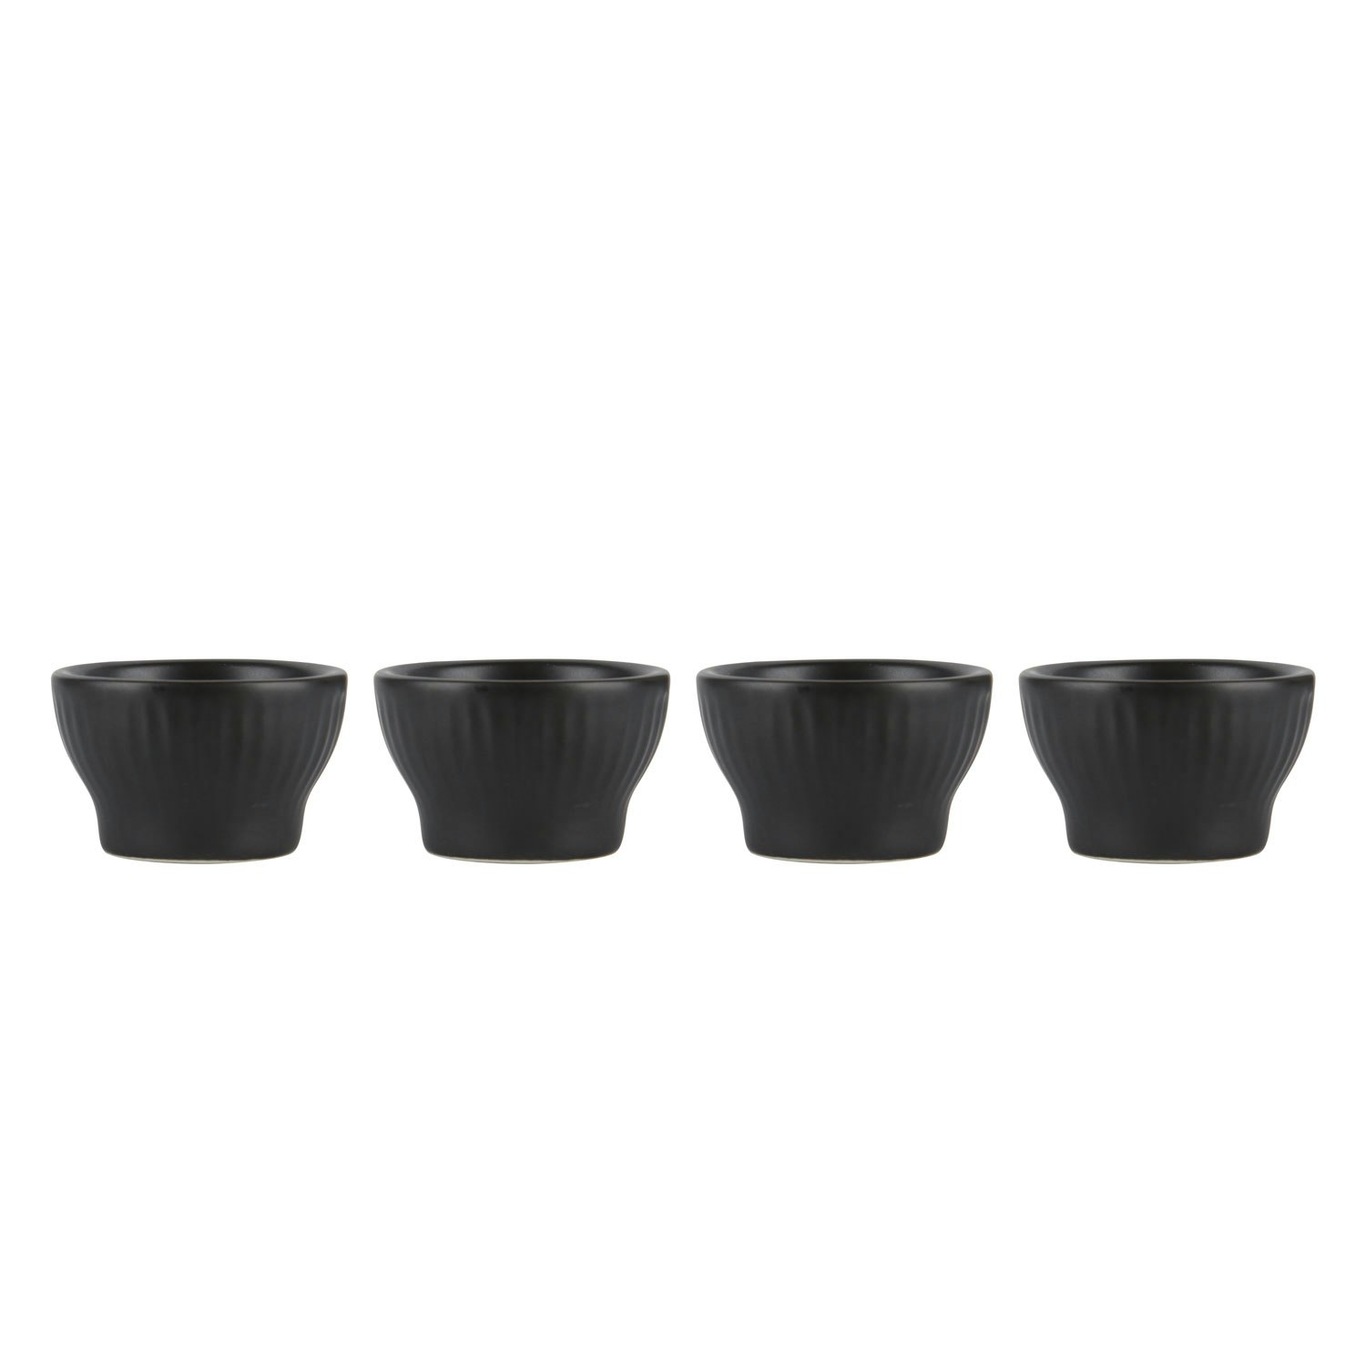 Groovy Egg Cups 4-pack, Black